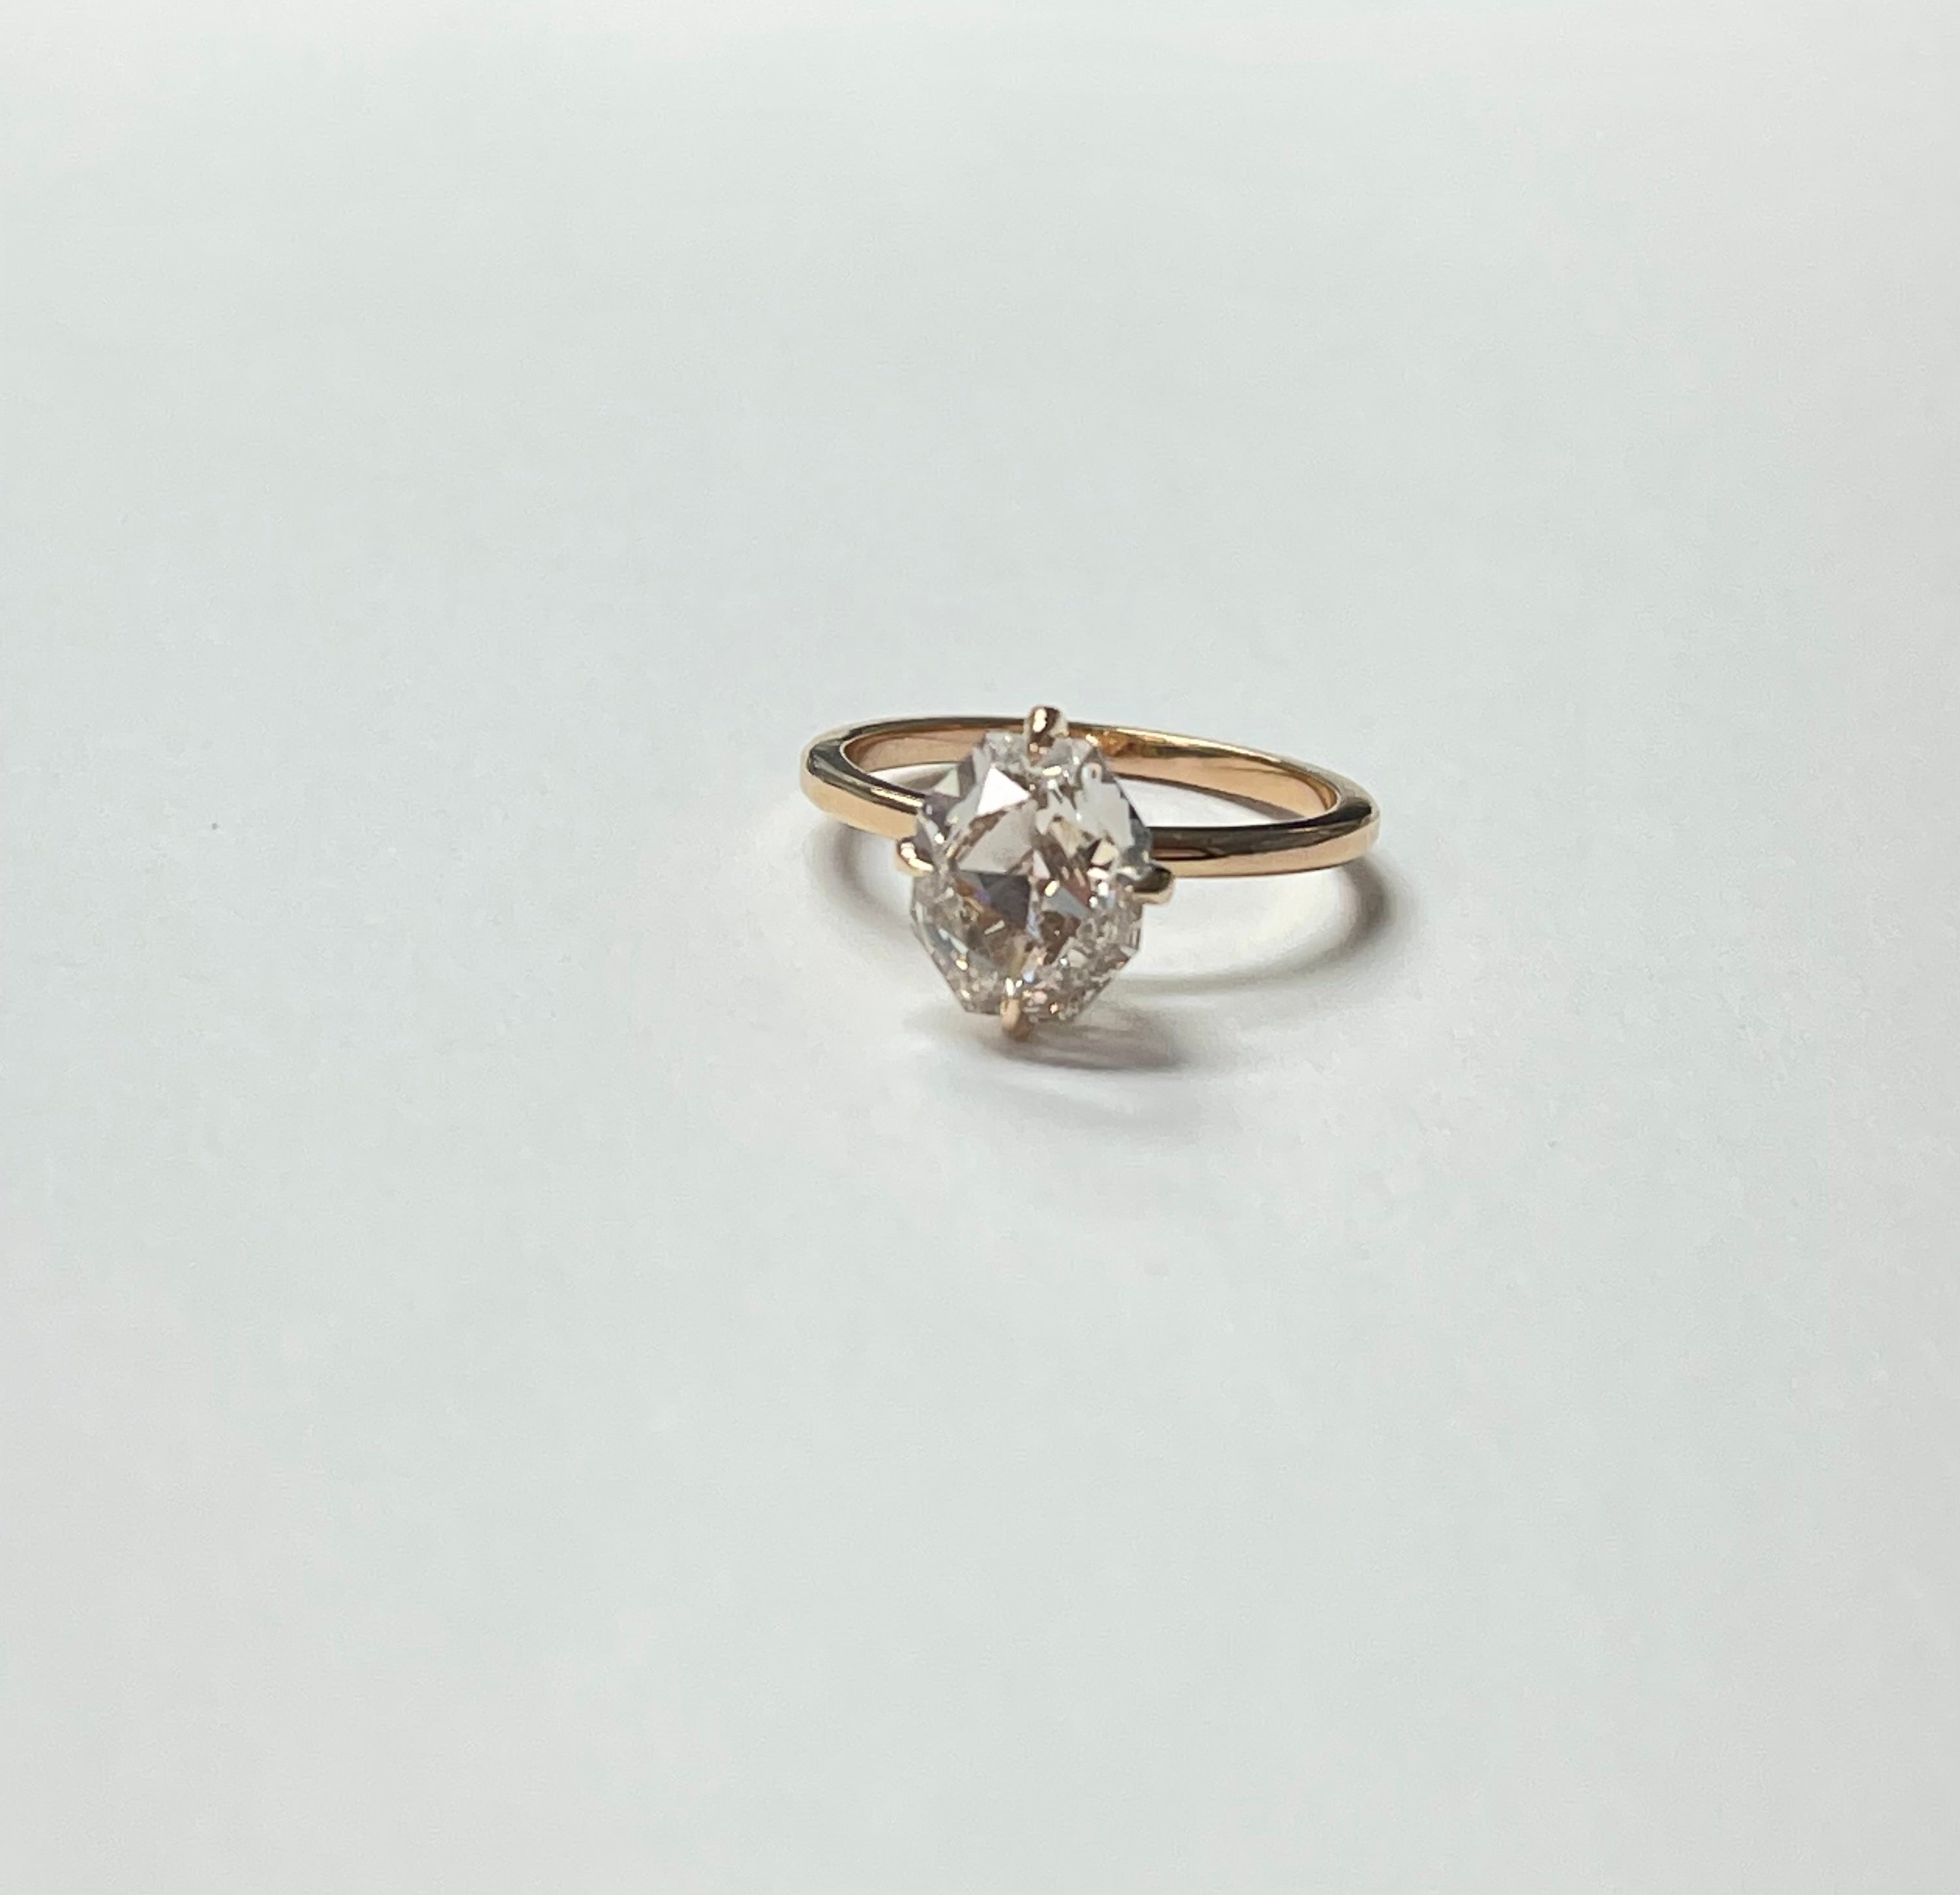 Fancy Light Pinkish Brown Octagonal Diamond Engagement Ring in Rose Gold, GIA In New Condition For Sale In New York, NY